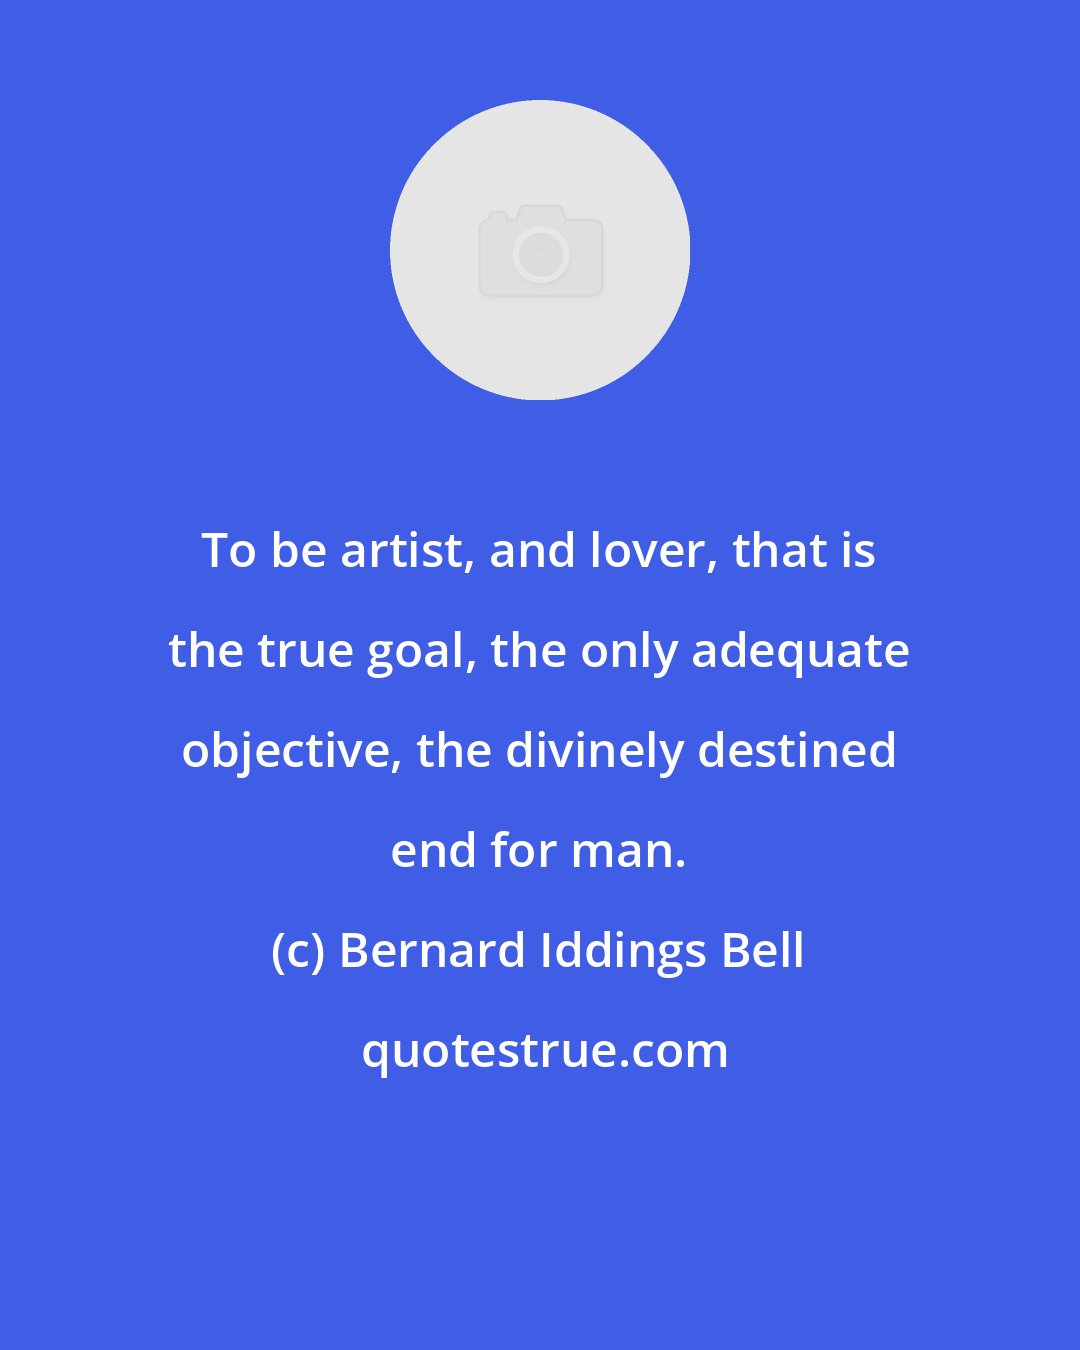 Bernard Iddings Bell: To be artist, and lover, that is the true goal, the only adequate objective, the divinely destined end for man.